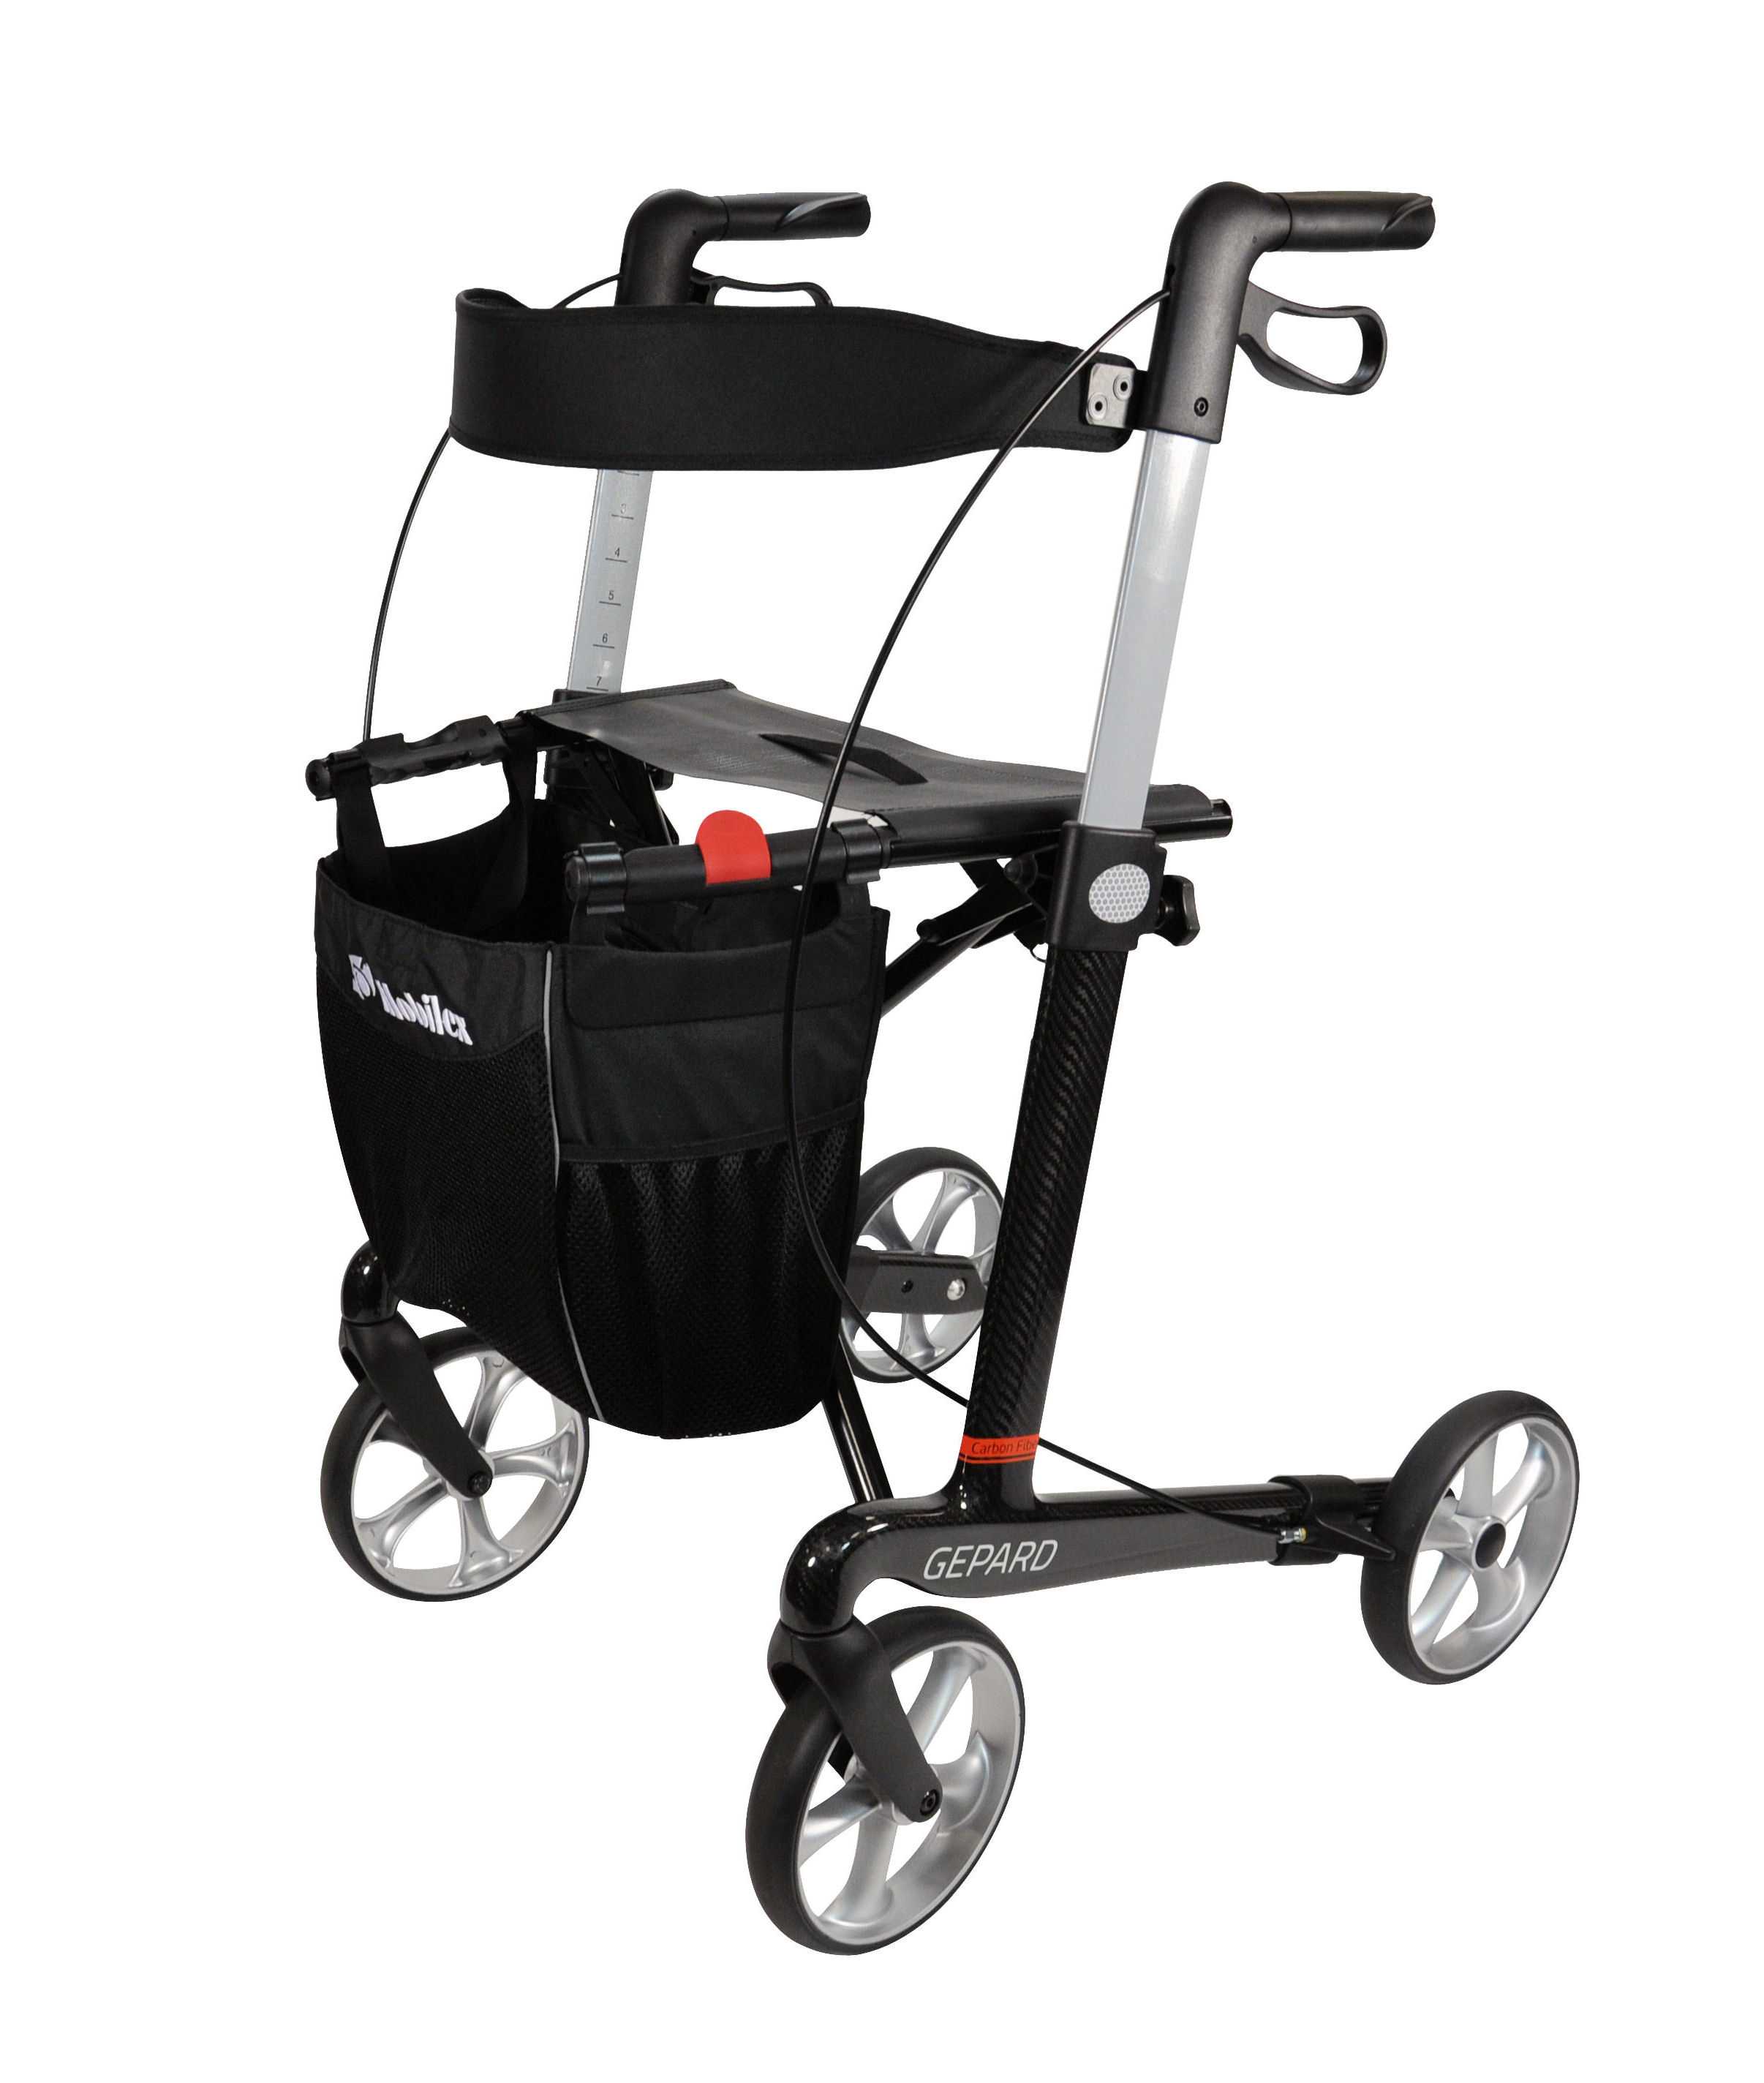 The Gepard Rollator helps older people keep walking which can prevent social isolation